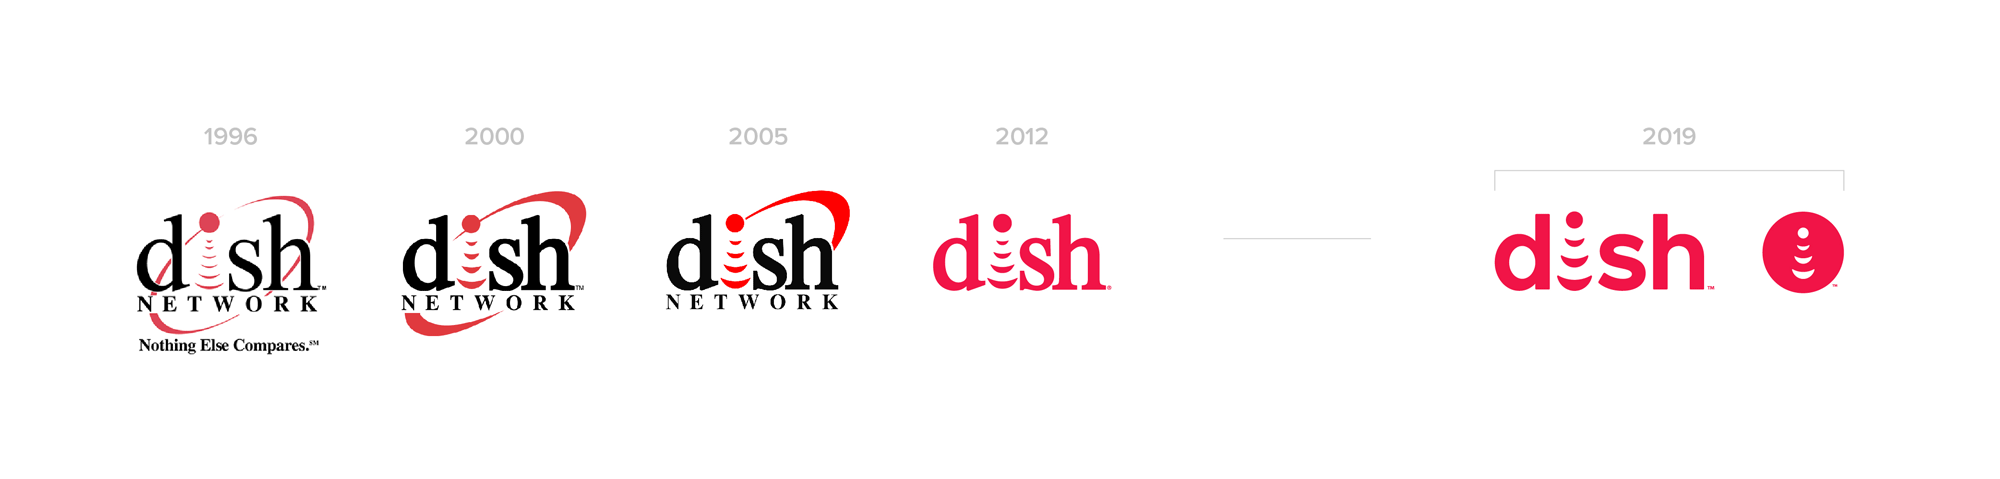 1996 Logo - Brand New: Follow-up: New Logo and Identity for DISH done In-house